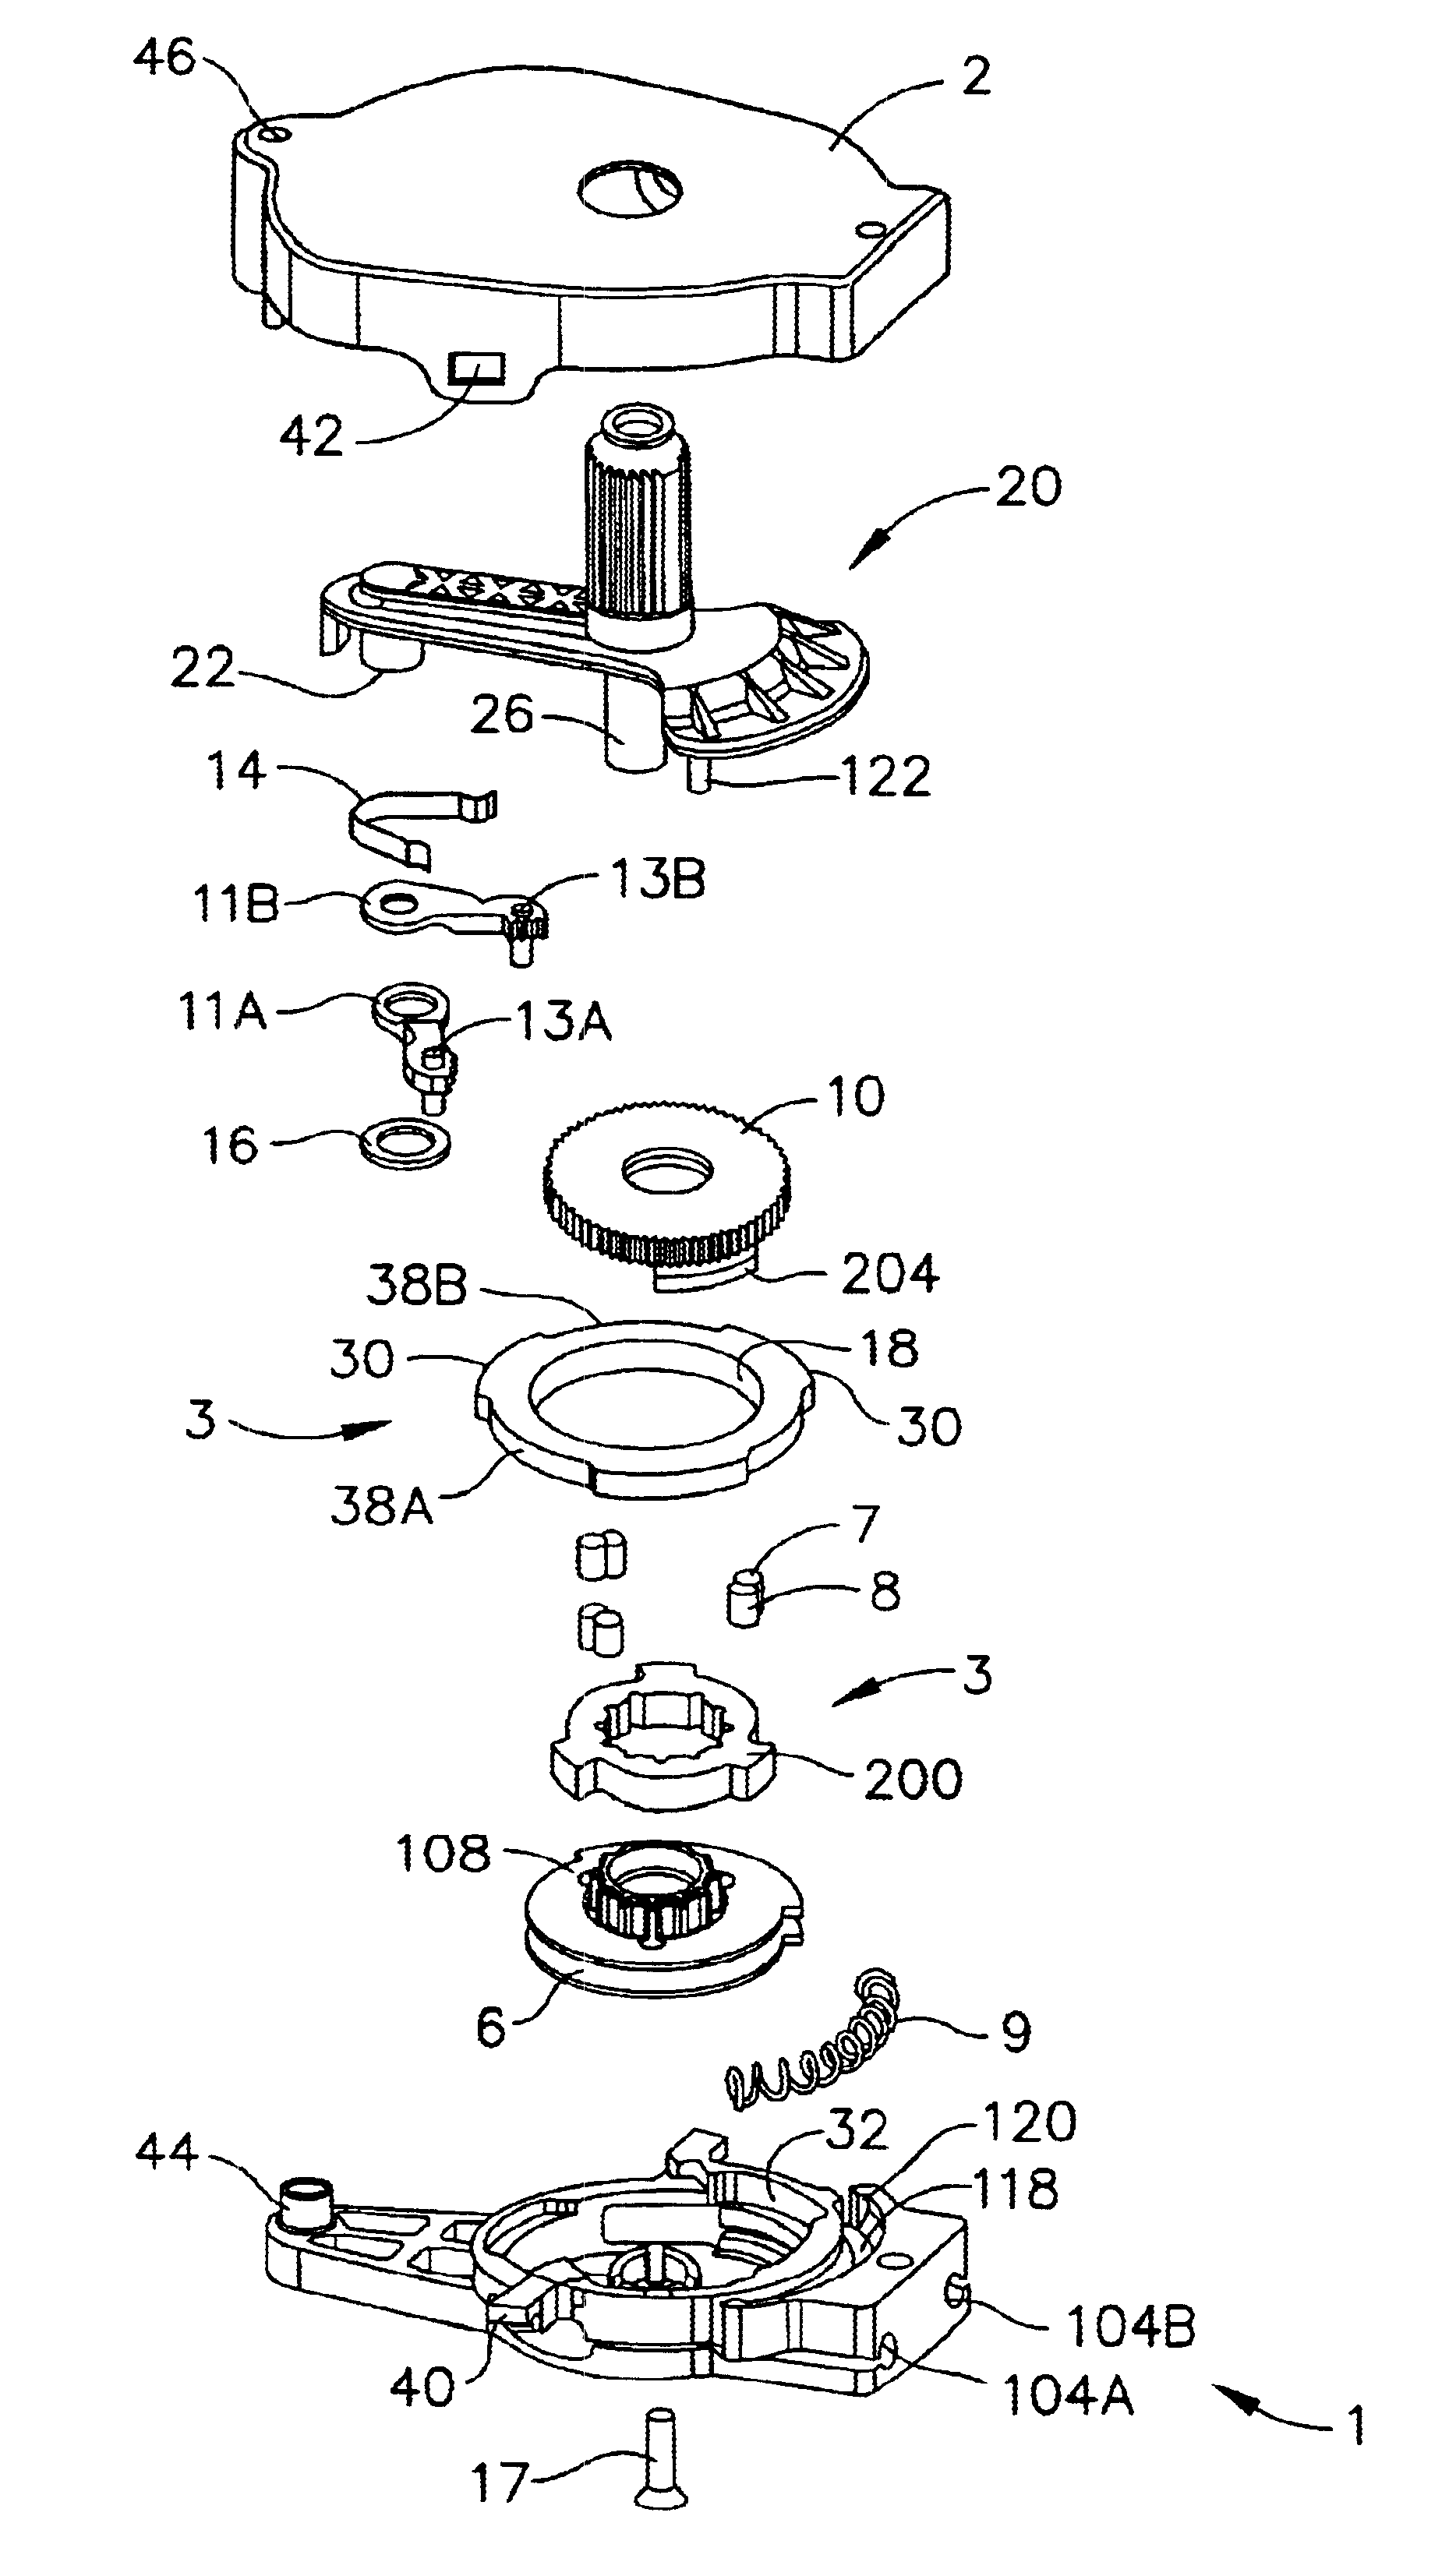 Apparatus and method for thin profile ratchet actuator